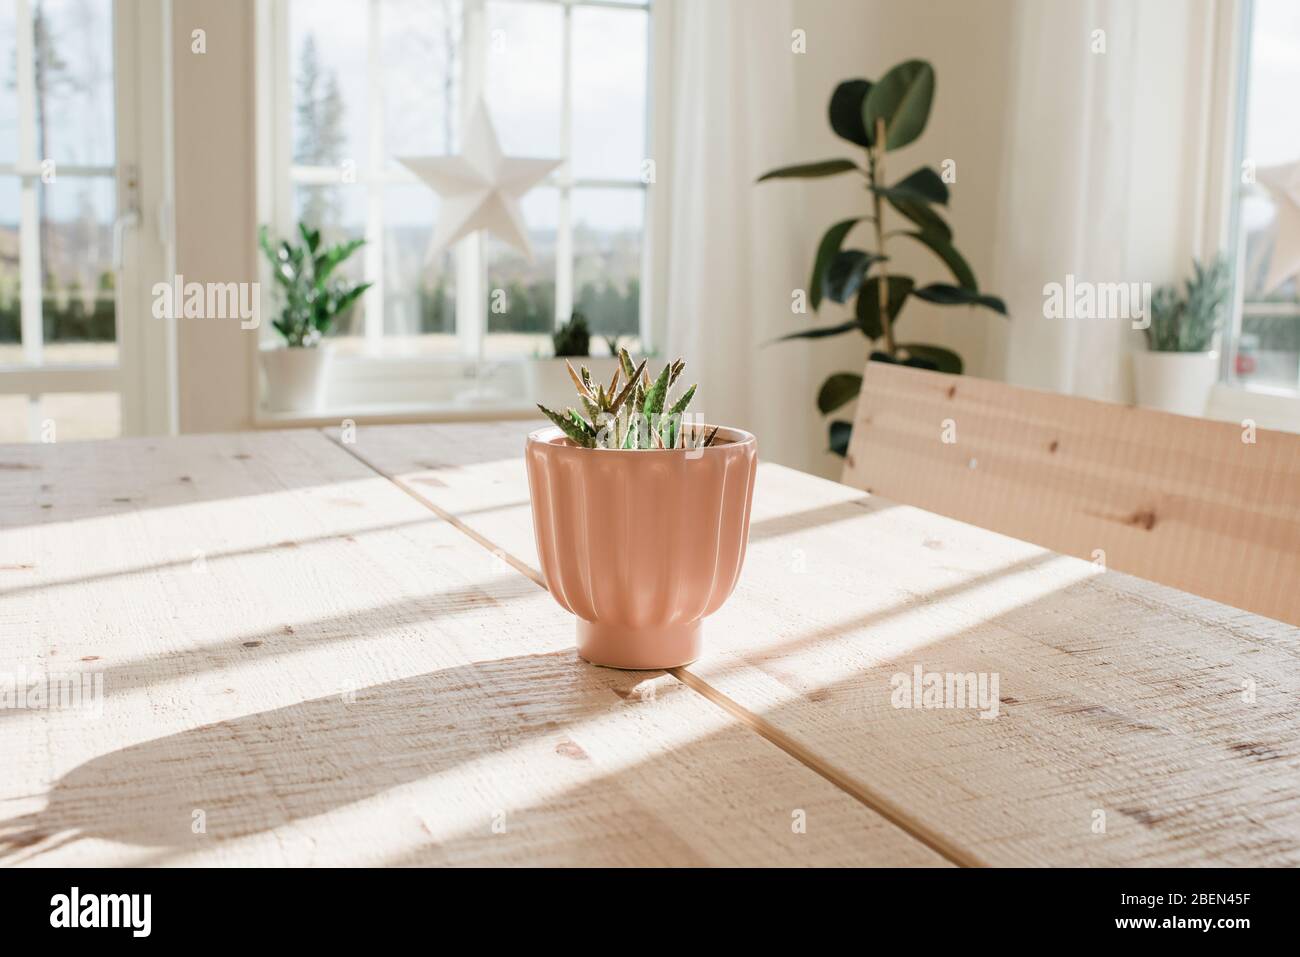 cactus plant on a table at home Stock Photo